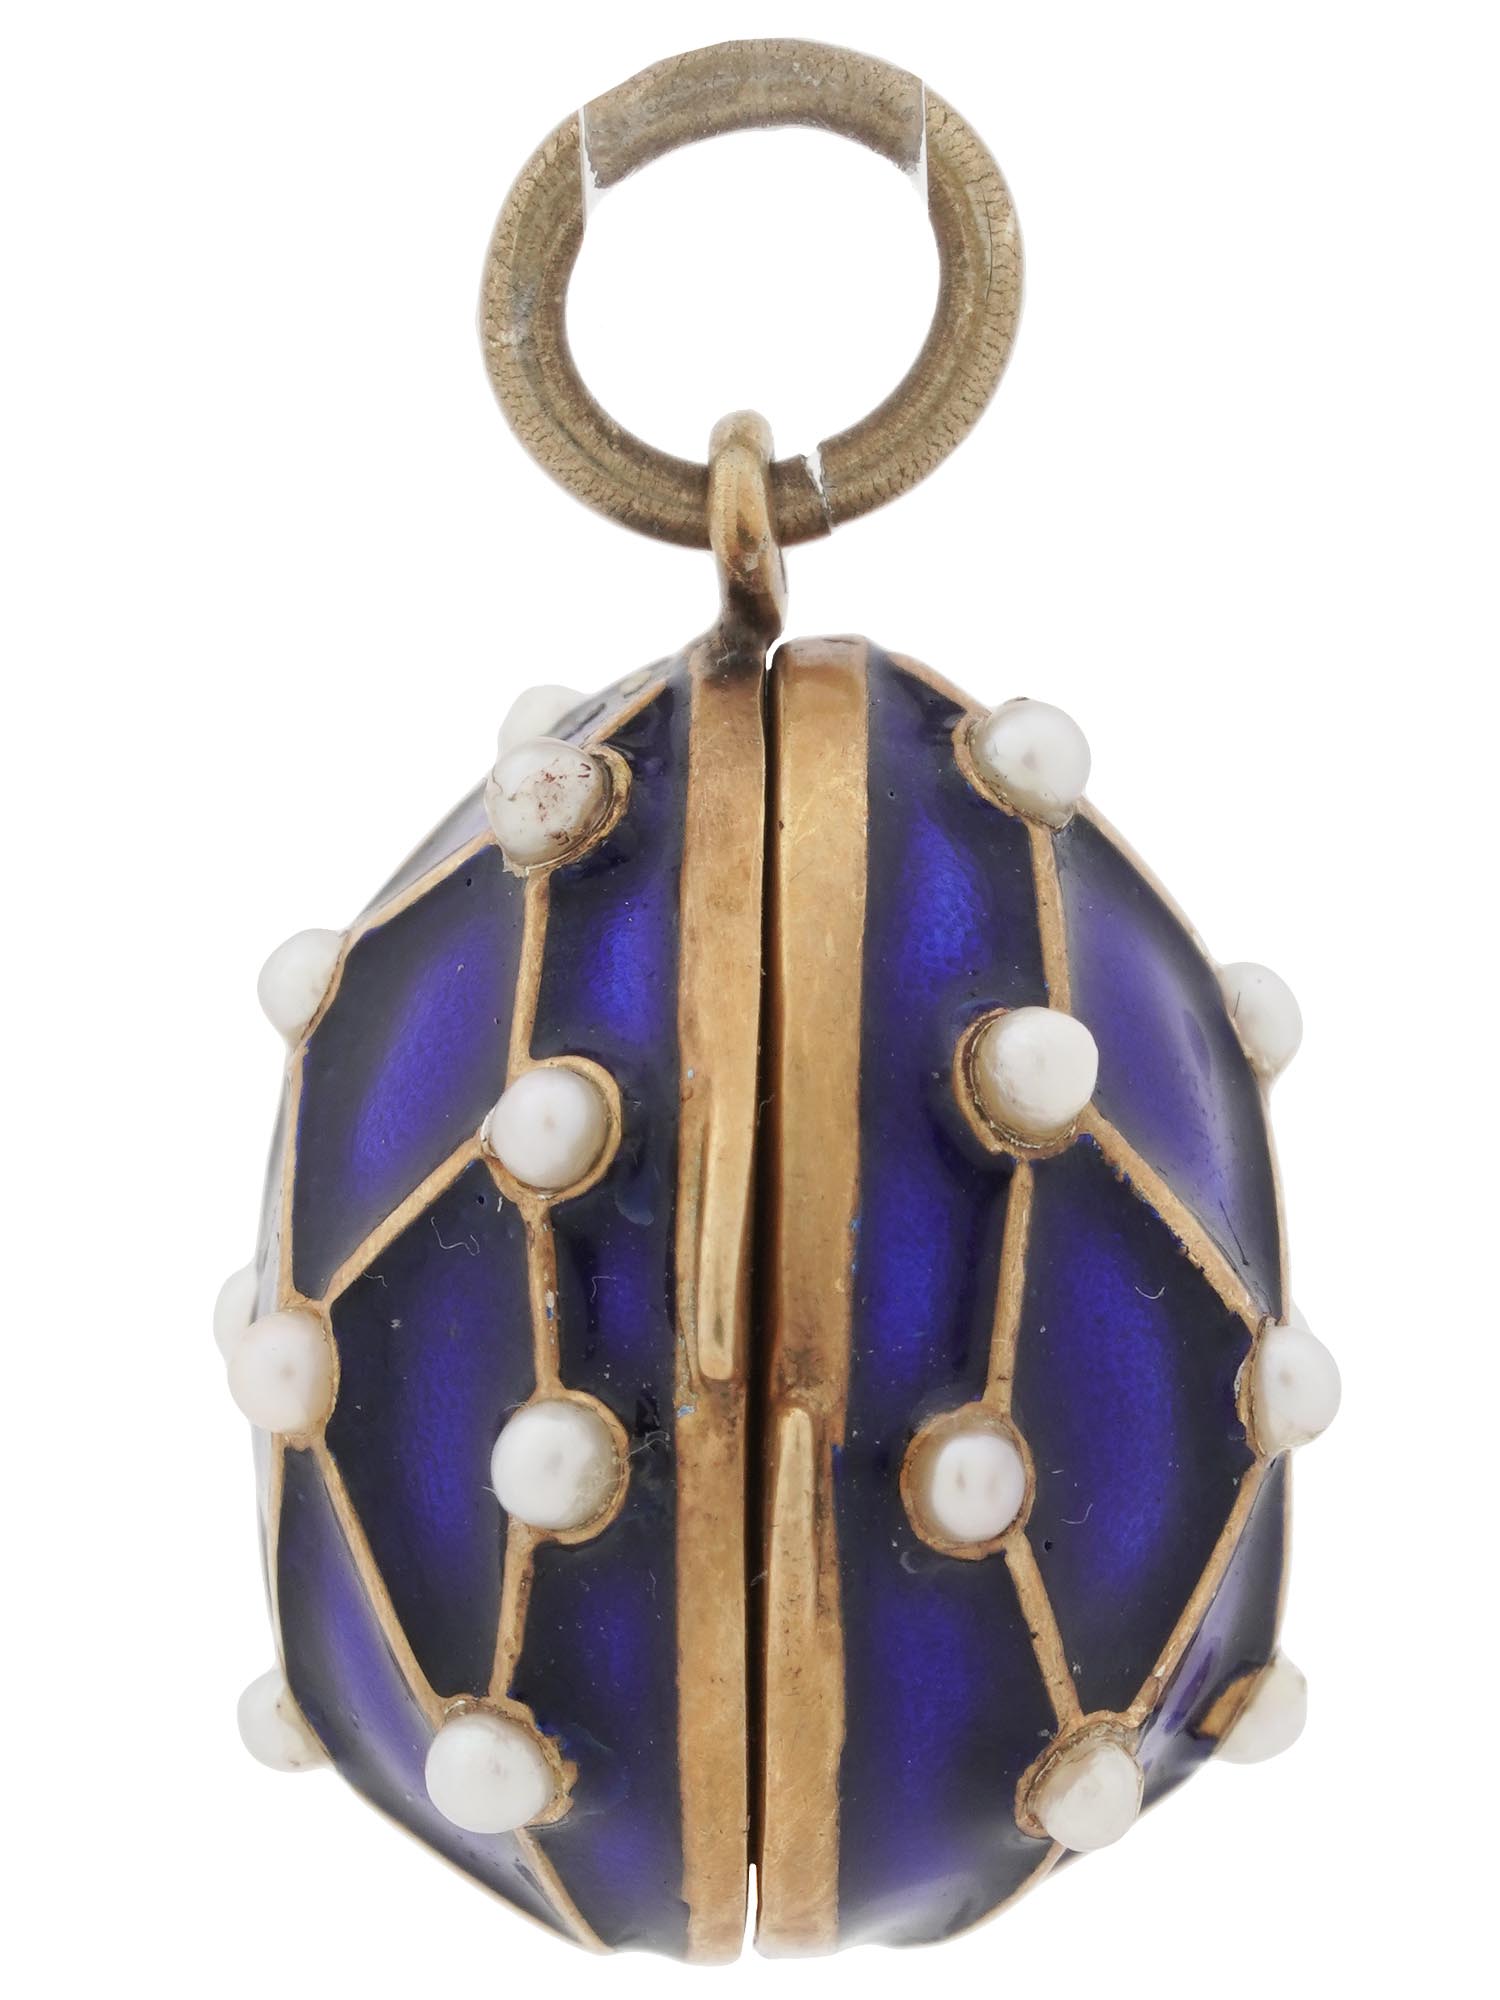 RUSSIAN EGG PENDANT GILT SILVER ENAMEL AND PEARLS PIC-1